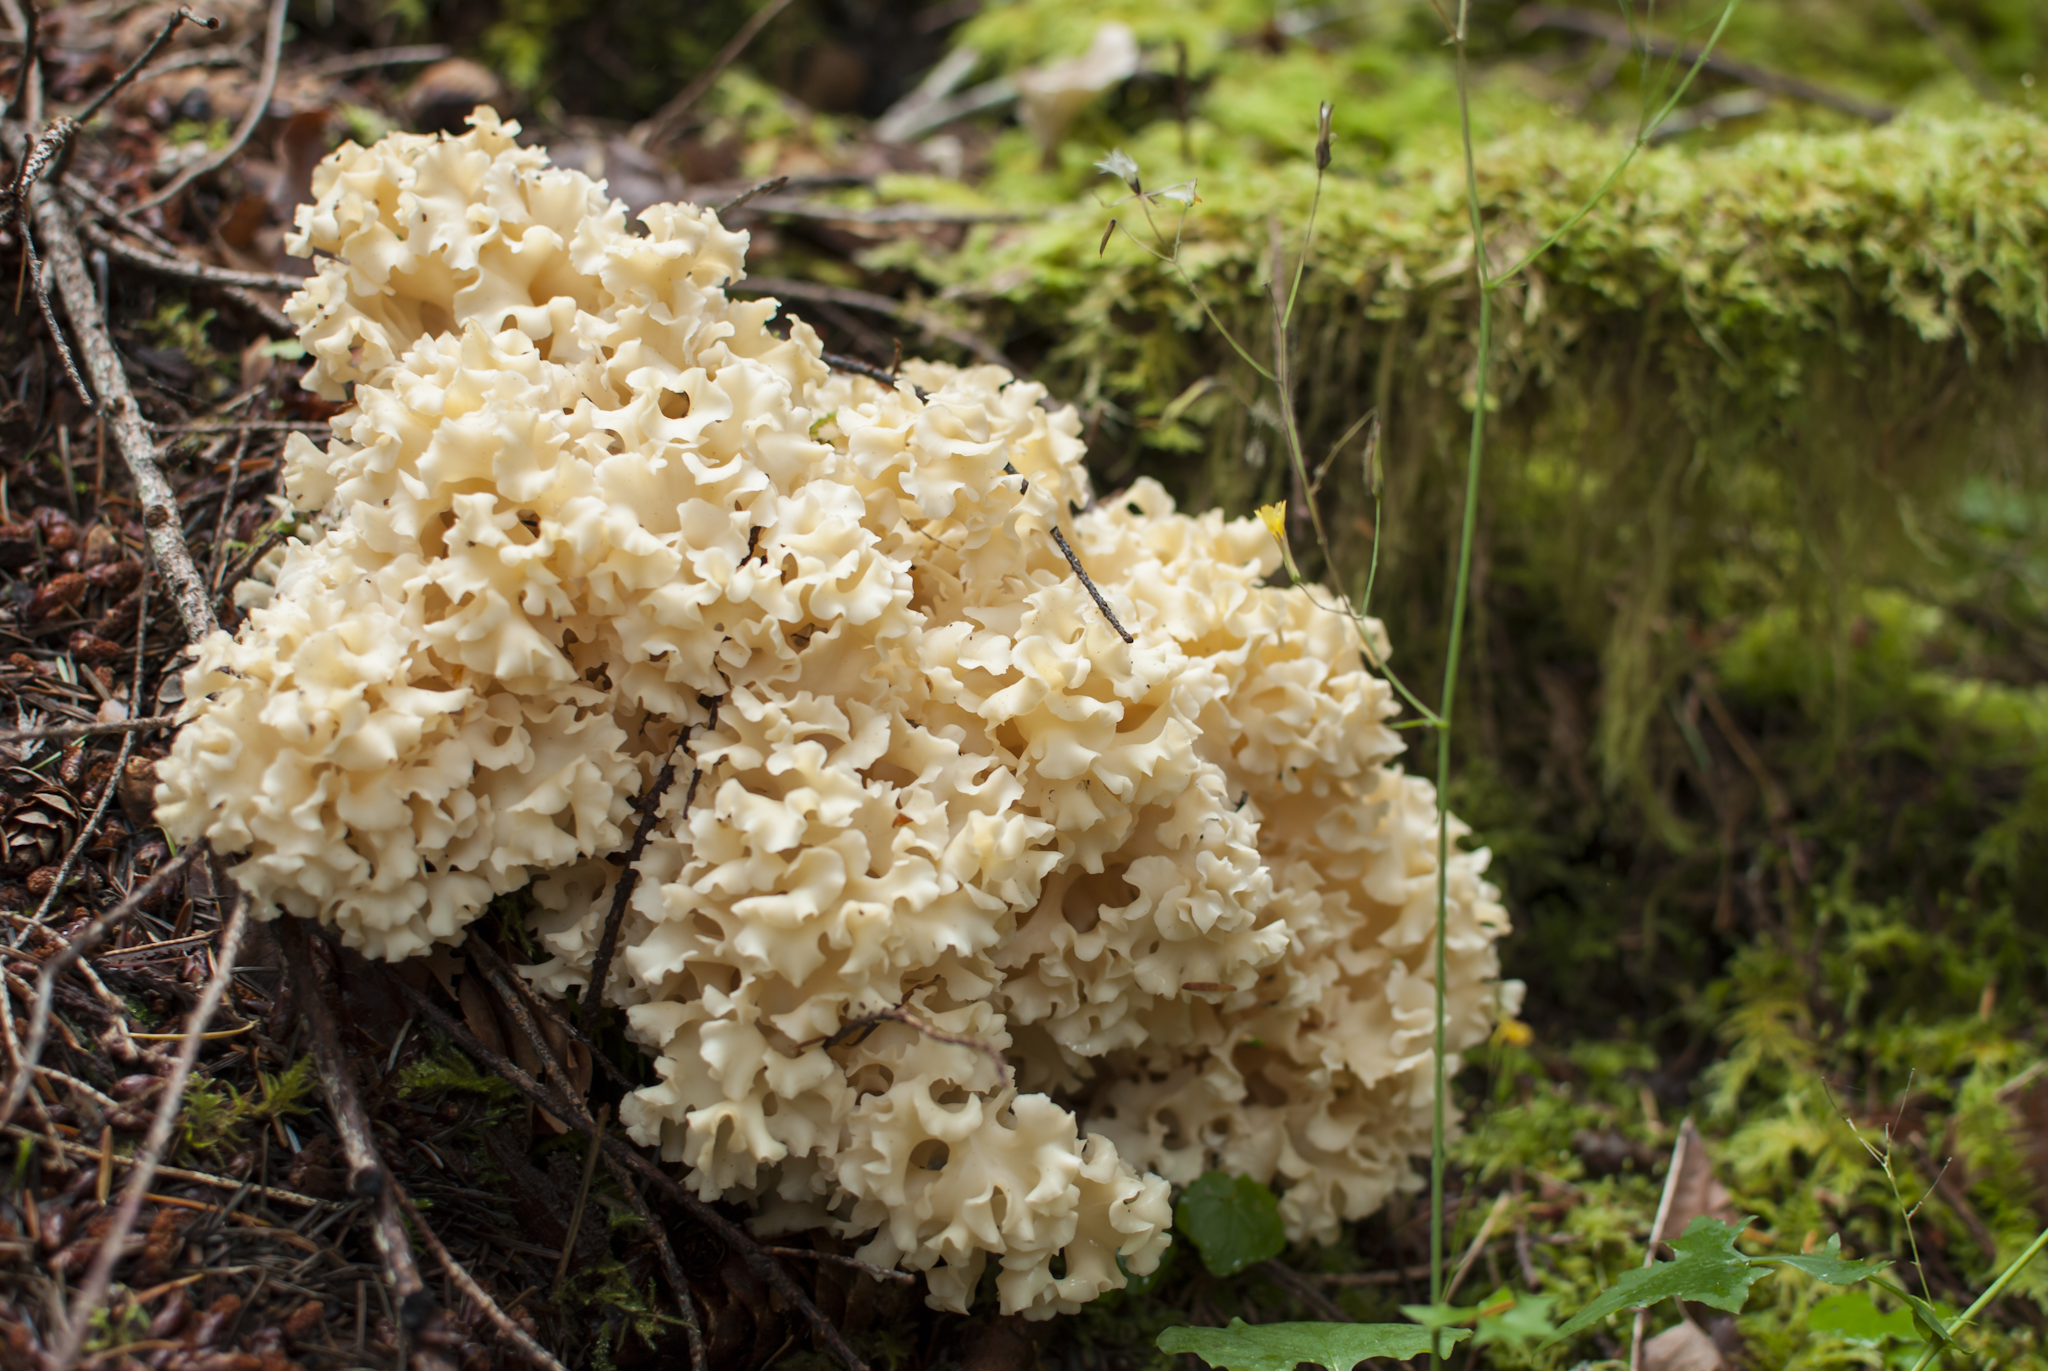 How to Identify Cauliflower Mushroom: A Guide to Recognizing These Fungi in the Wild